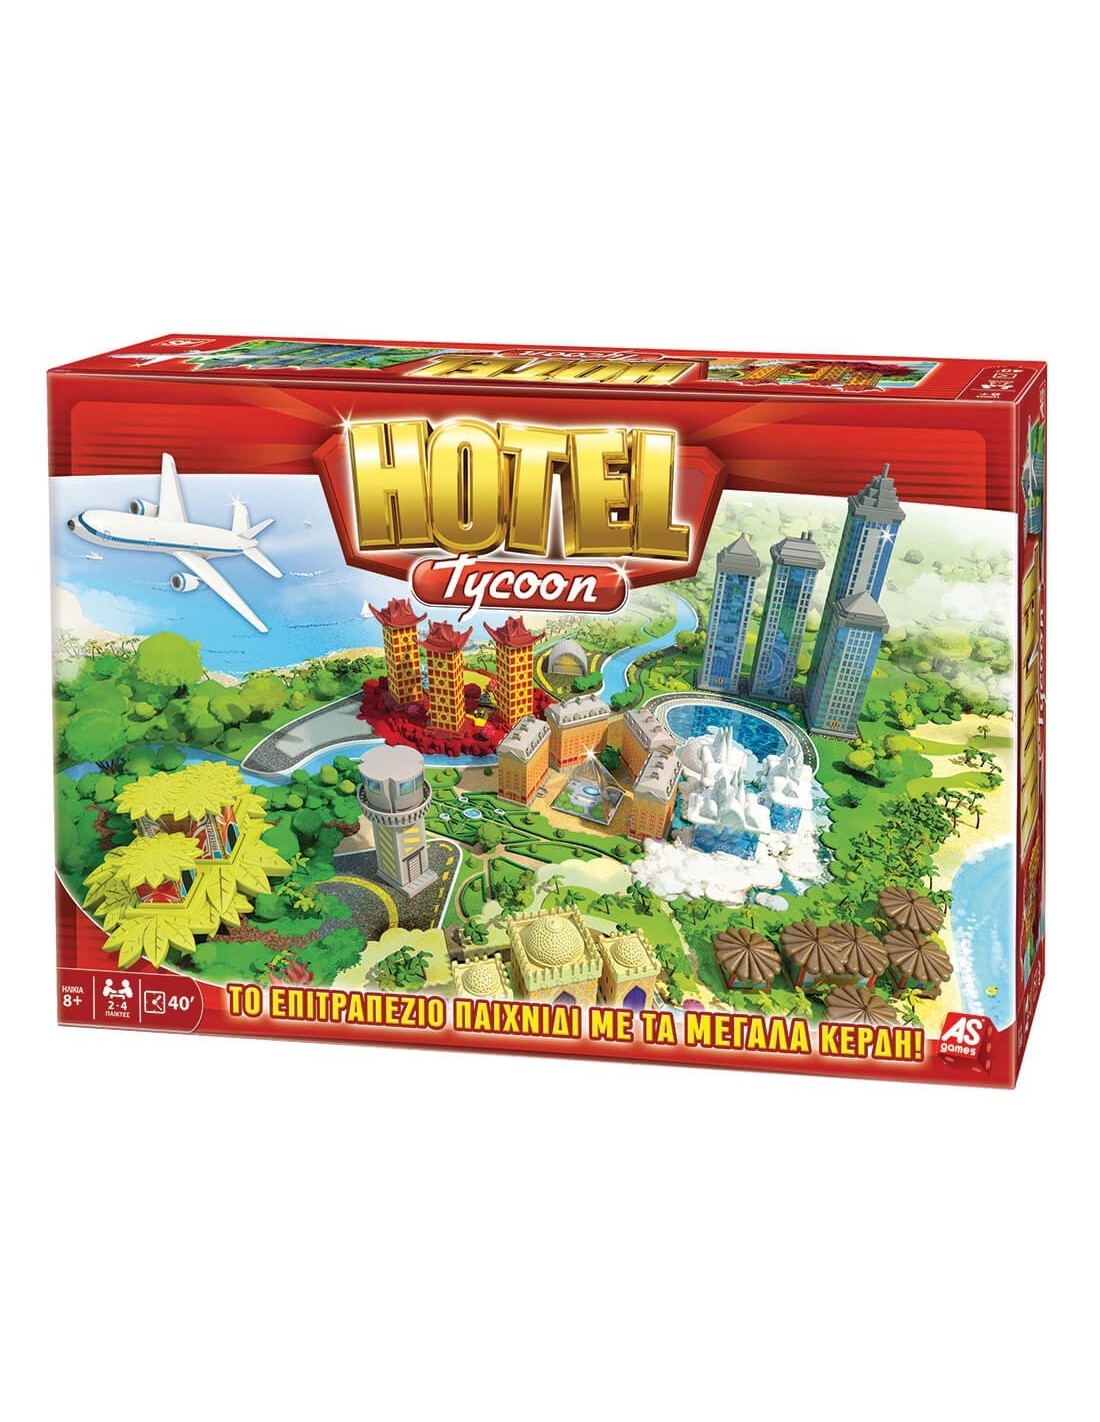 Hotel Tycoon New Edition 1040-20187